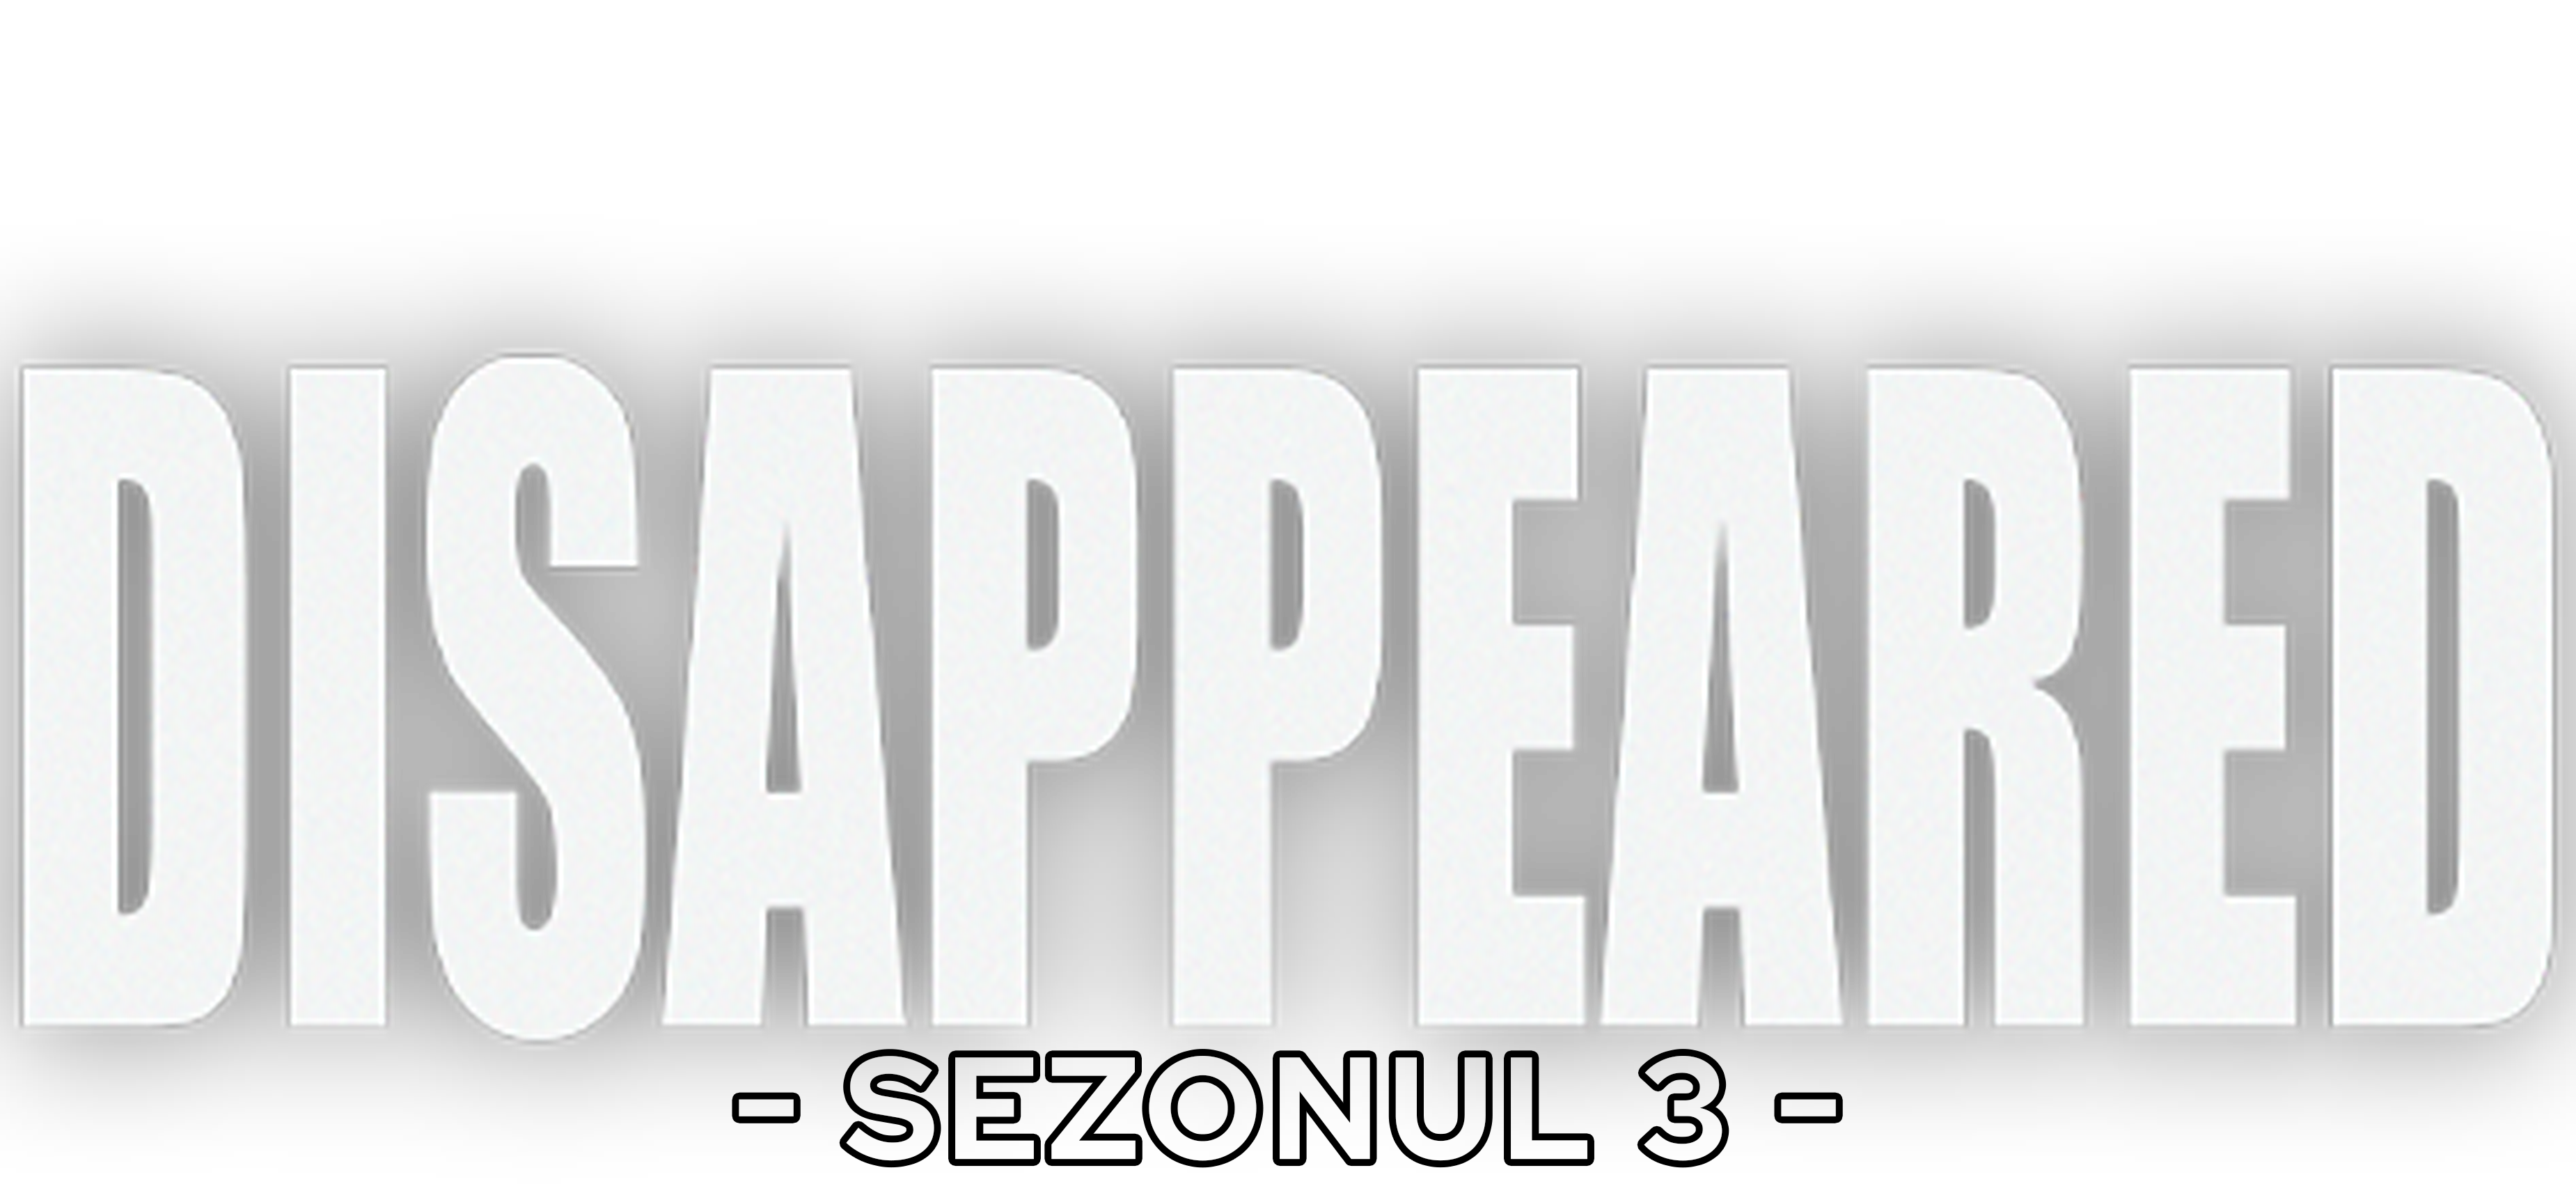 Disappeared | Sezonul 3